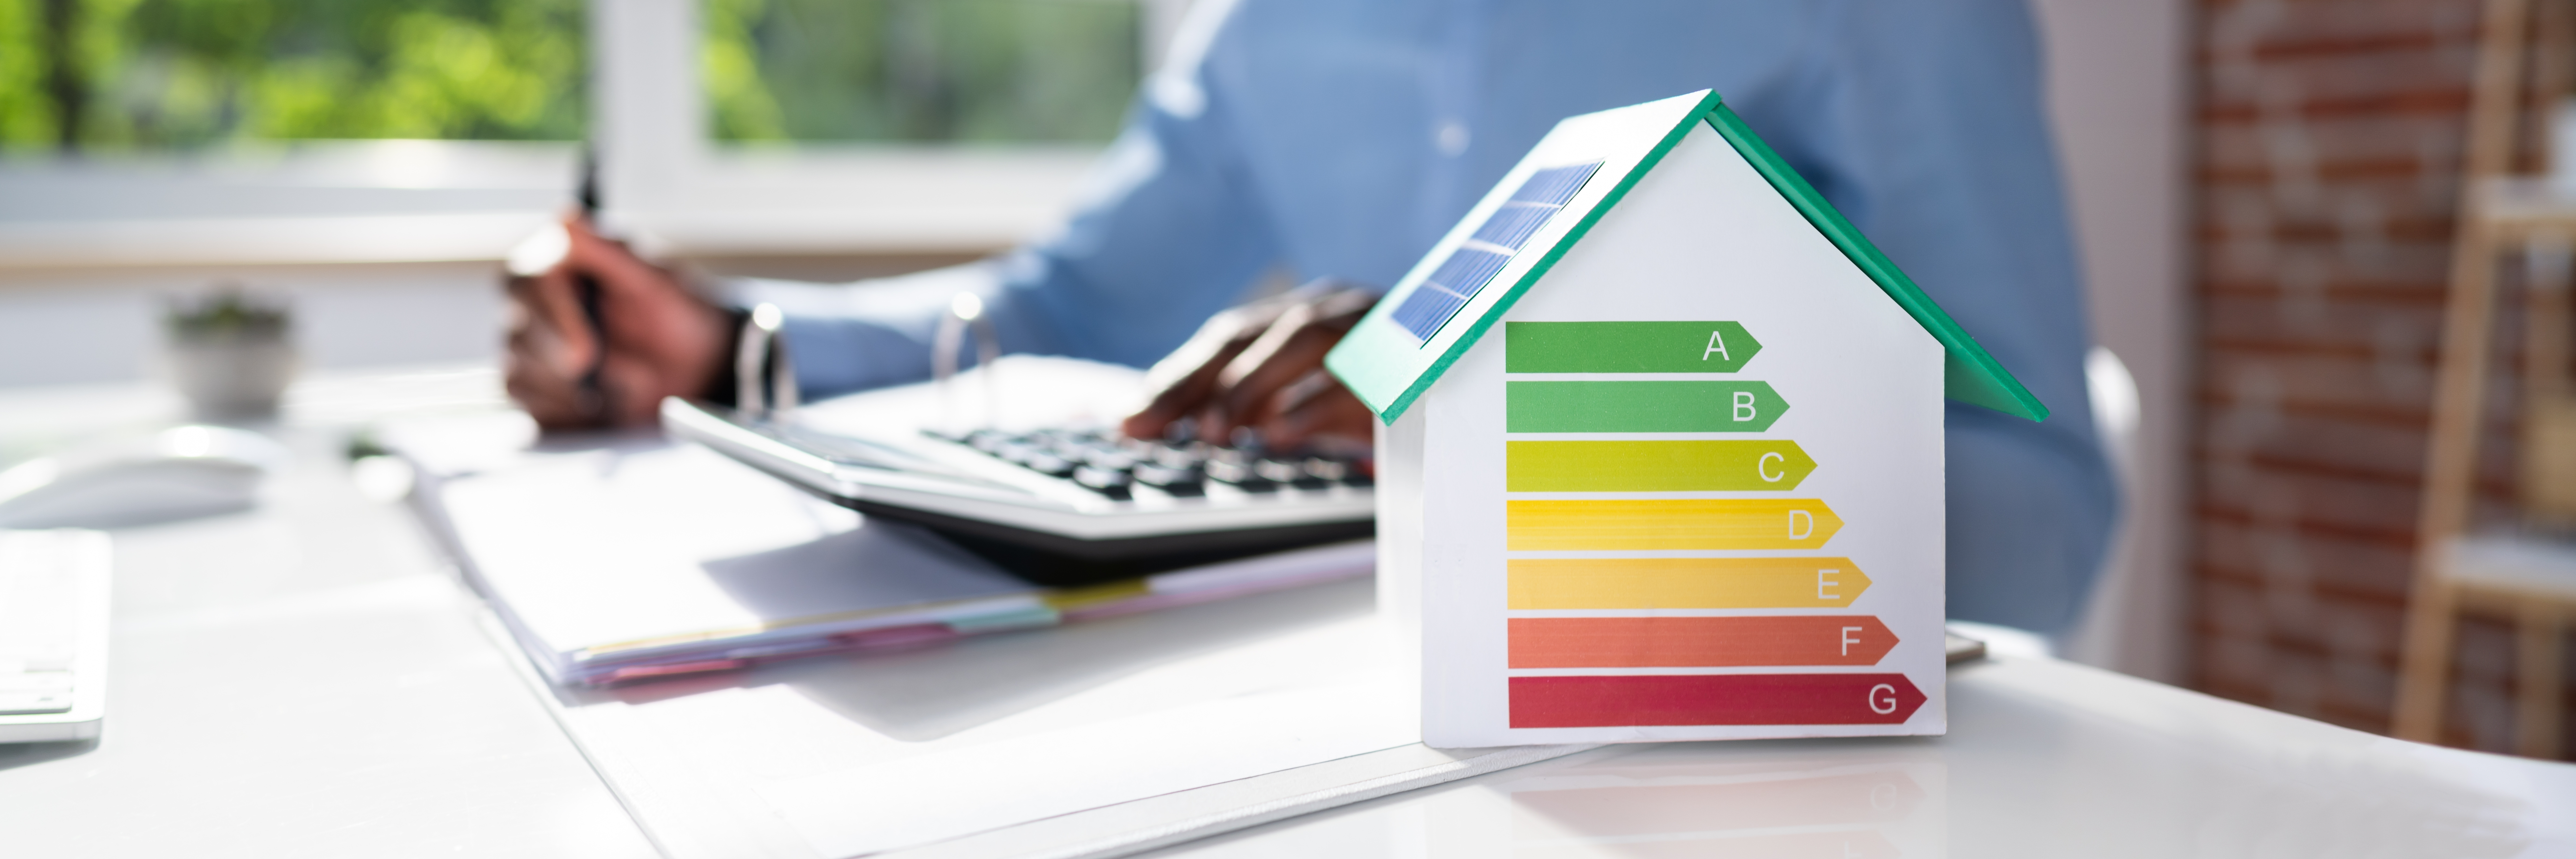 What is a Mass Save® Home Energy Assessment & How Can It Help You Save?